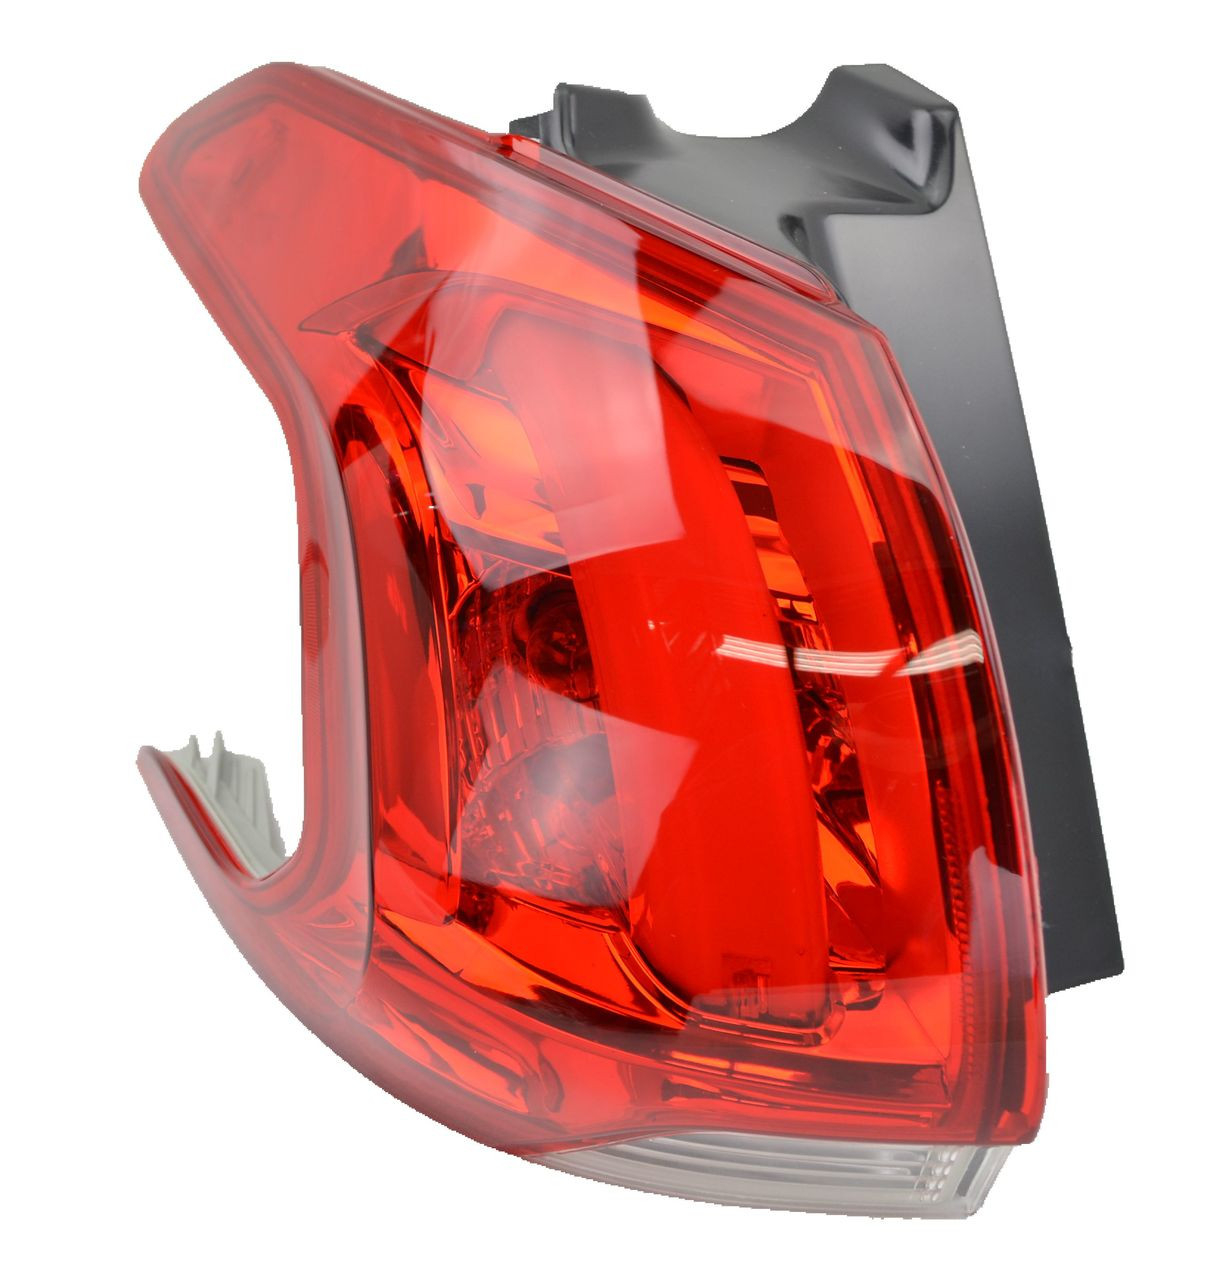 Tail light for Peugeot 2008 A94 10/13-01/17 New Left LHS Rear Lamp SUV 14 15 16 17